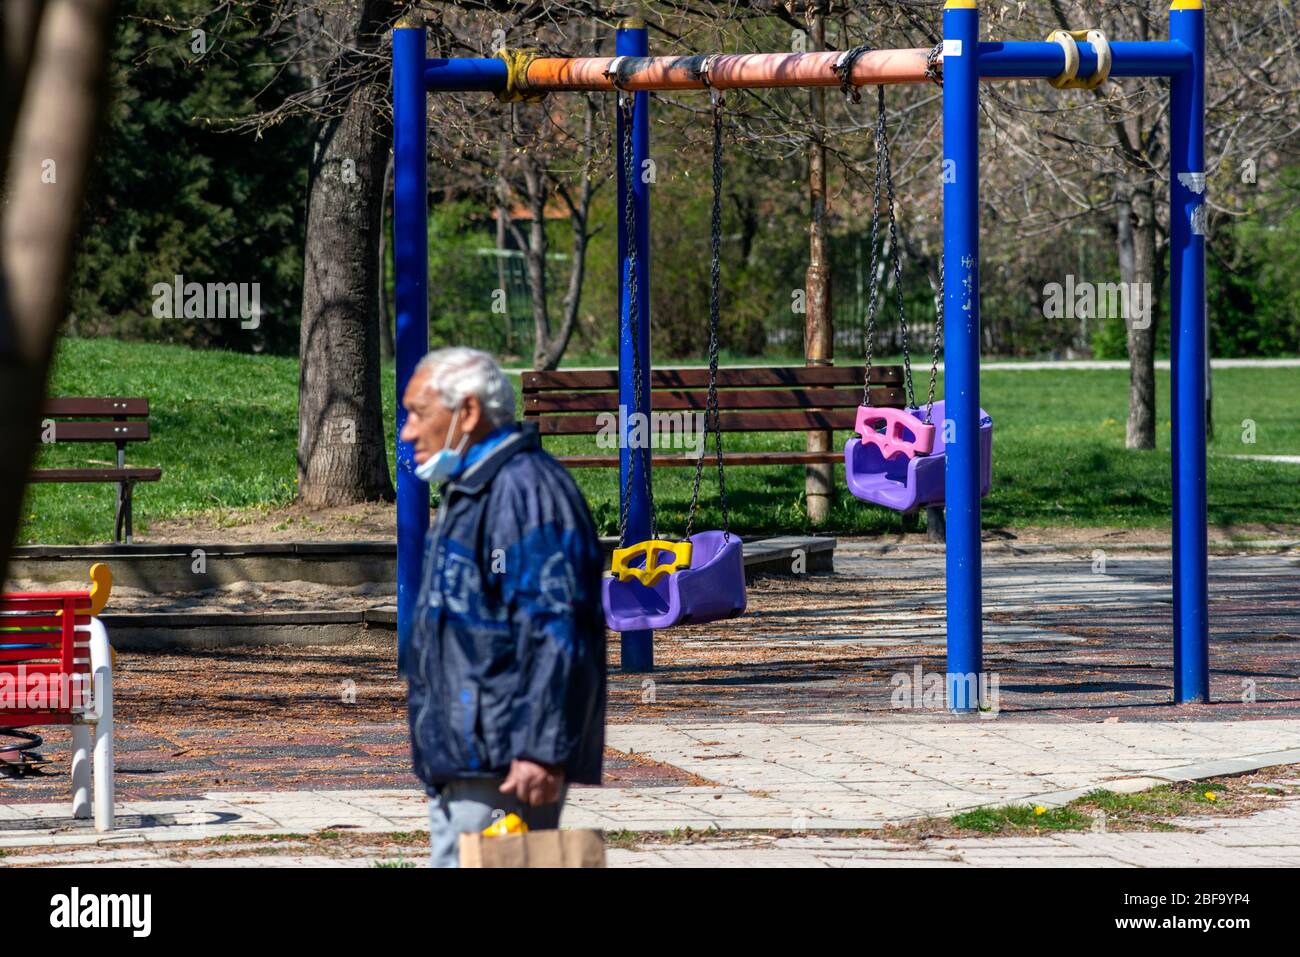 Sofia, Bulgaria. 16 April 2020. Senior man wearing protective face mask walking past empty deserted blue swings at colourful playground or play area on beautiful sunny day. The public park playgrounds have been closed during the lockdown because of the Coronavirus Pandemic of Covid-19 spread. Stock Photo